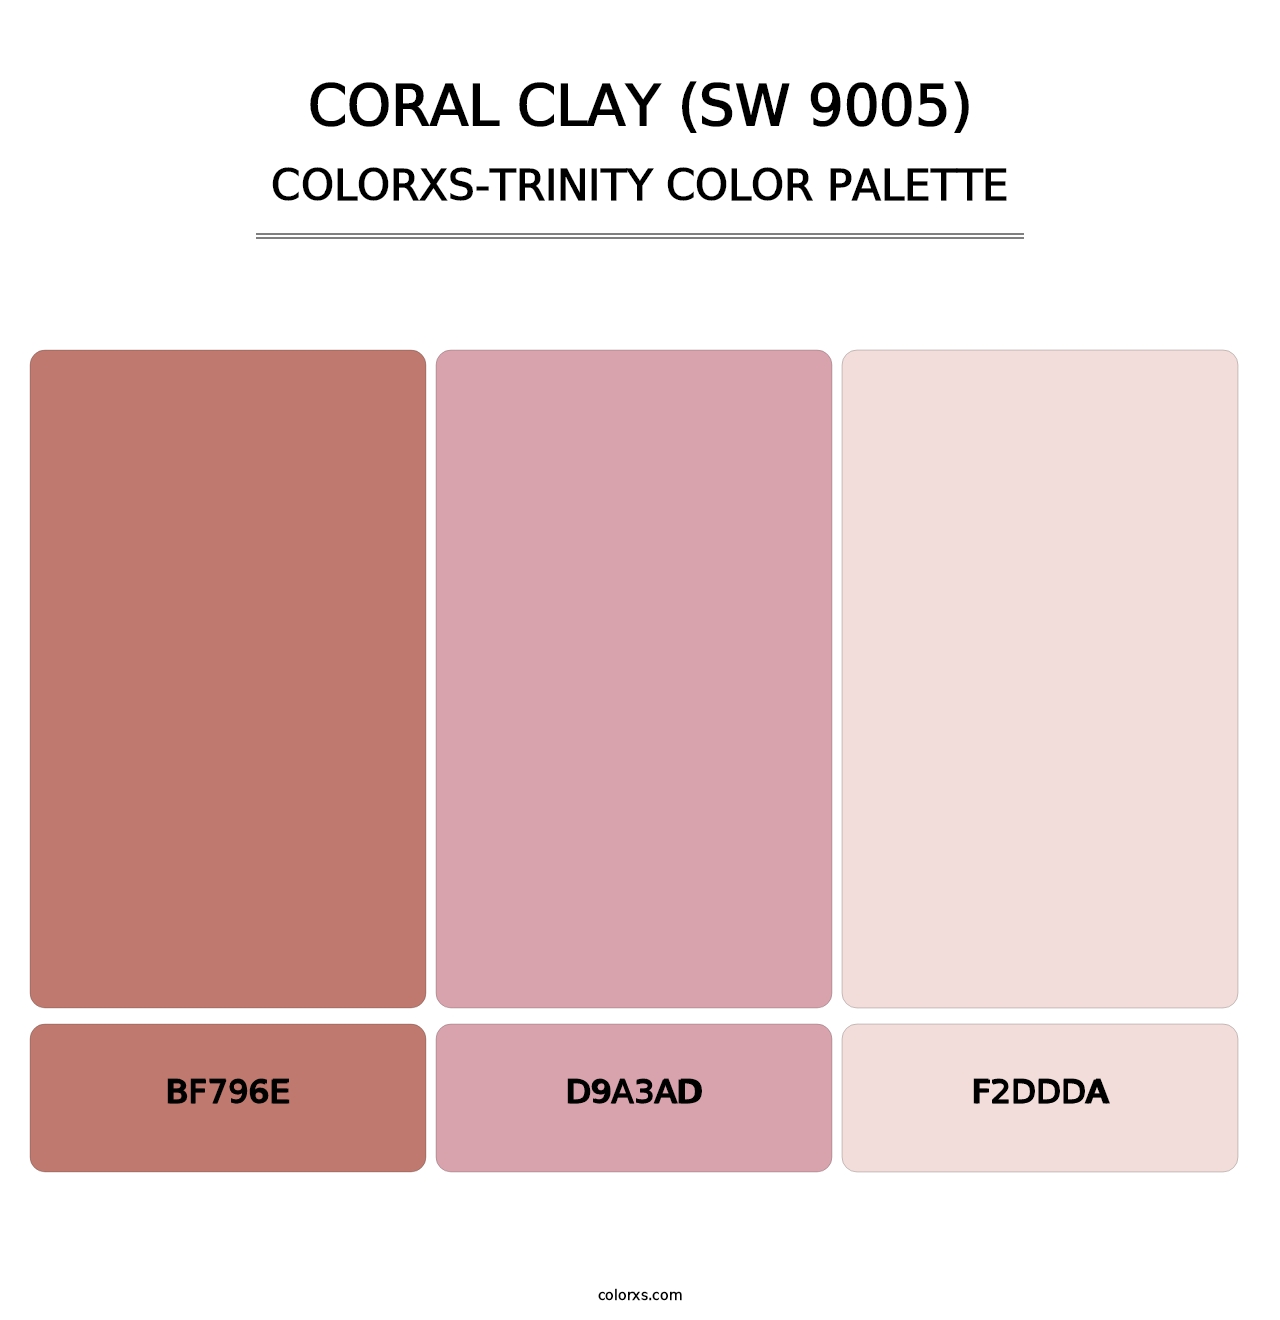 Coral Clay (SW 9005) - Colorxs Trinity Palette